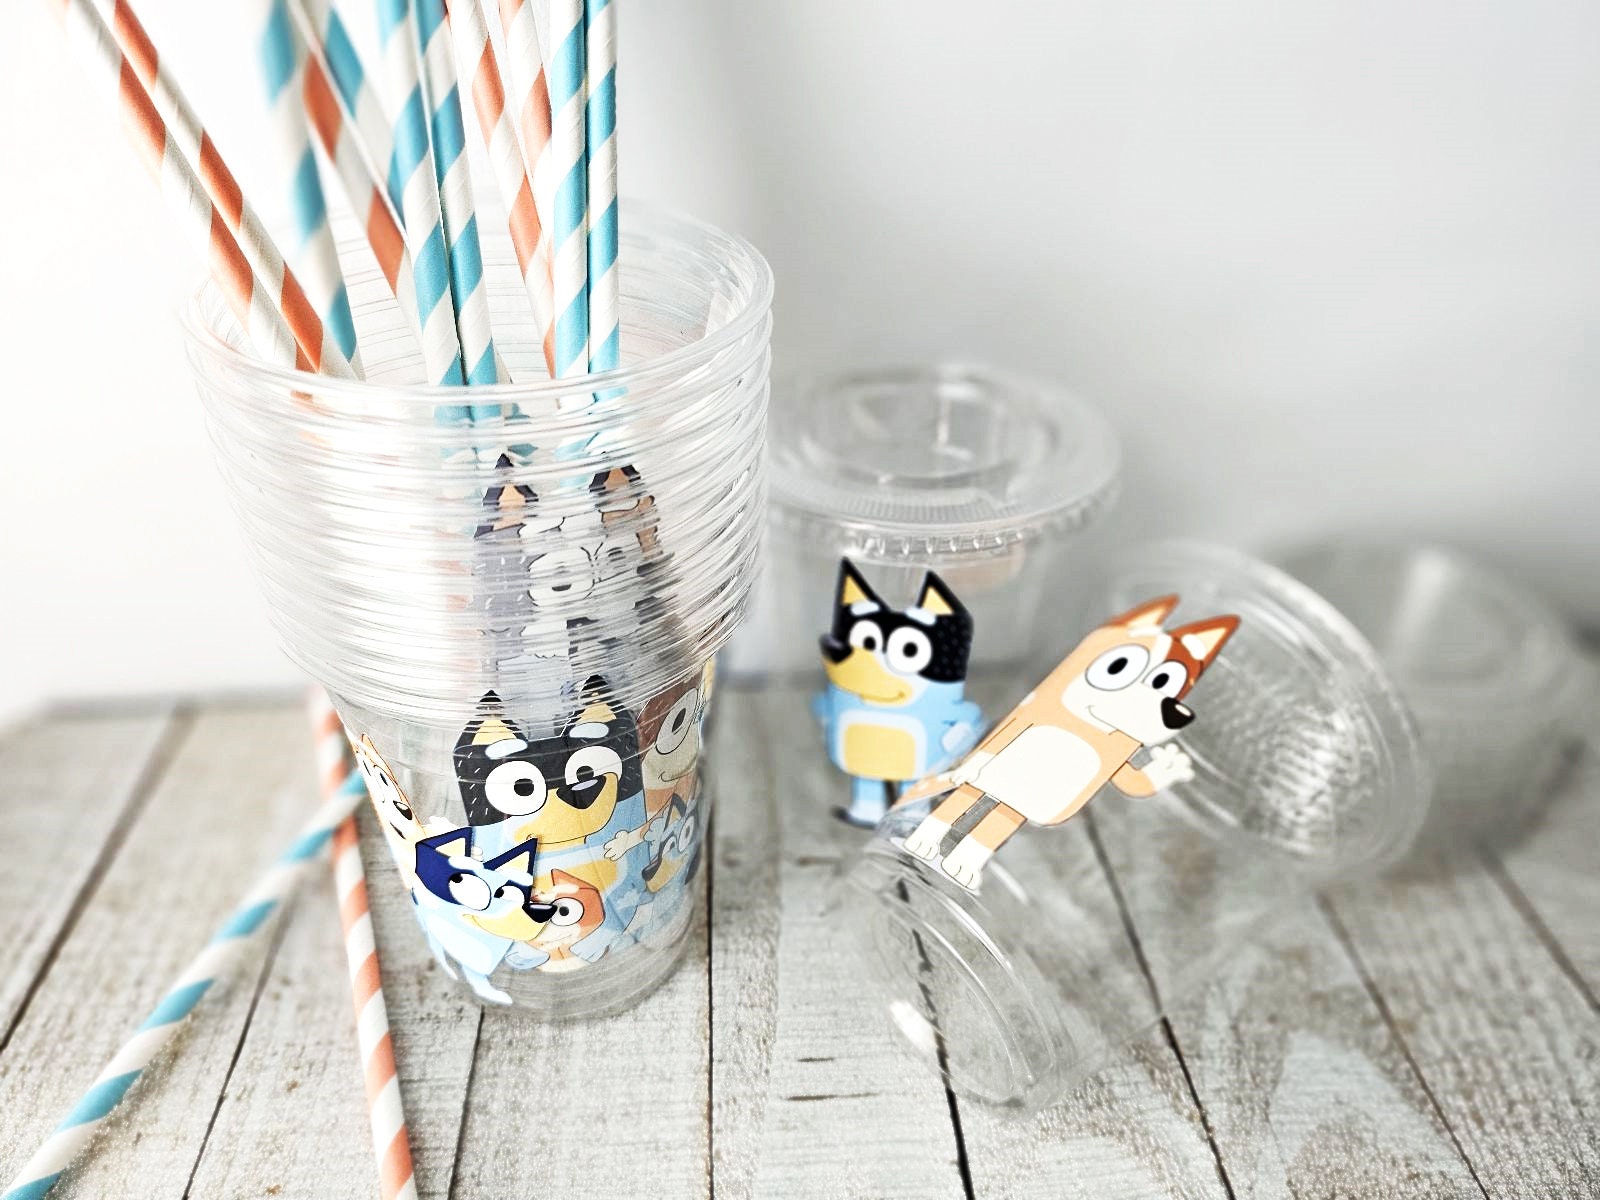 Bluey themed Party Cups Pack of 8s